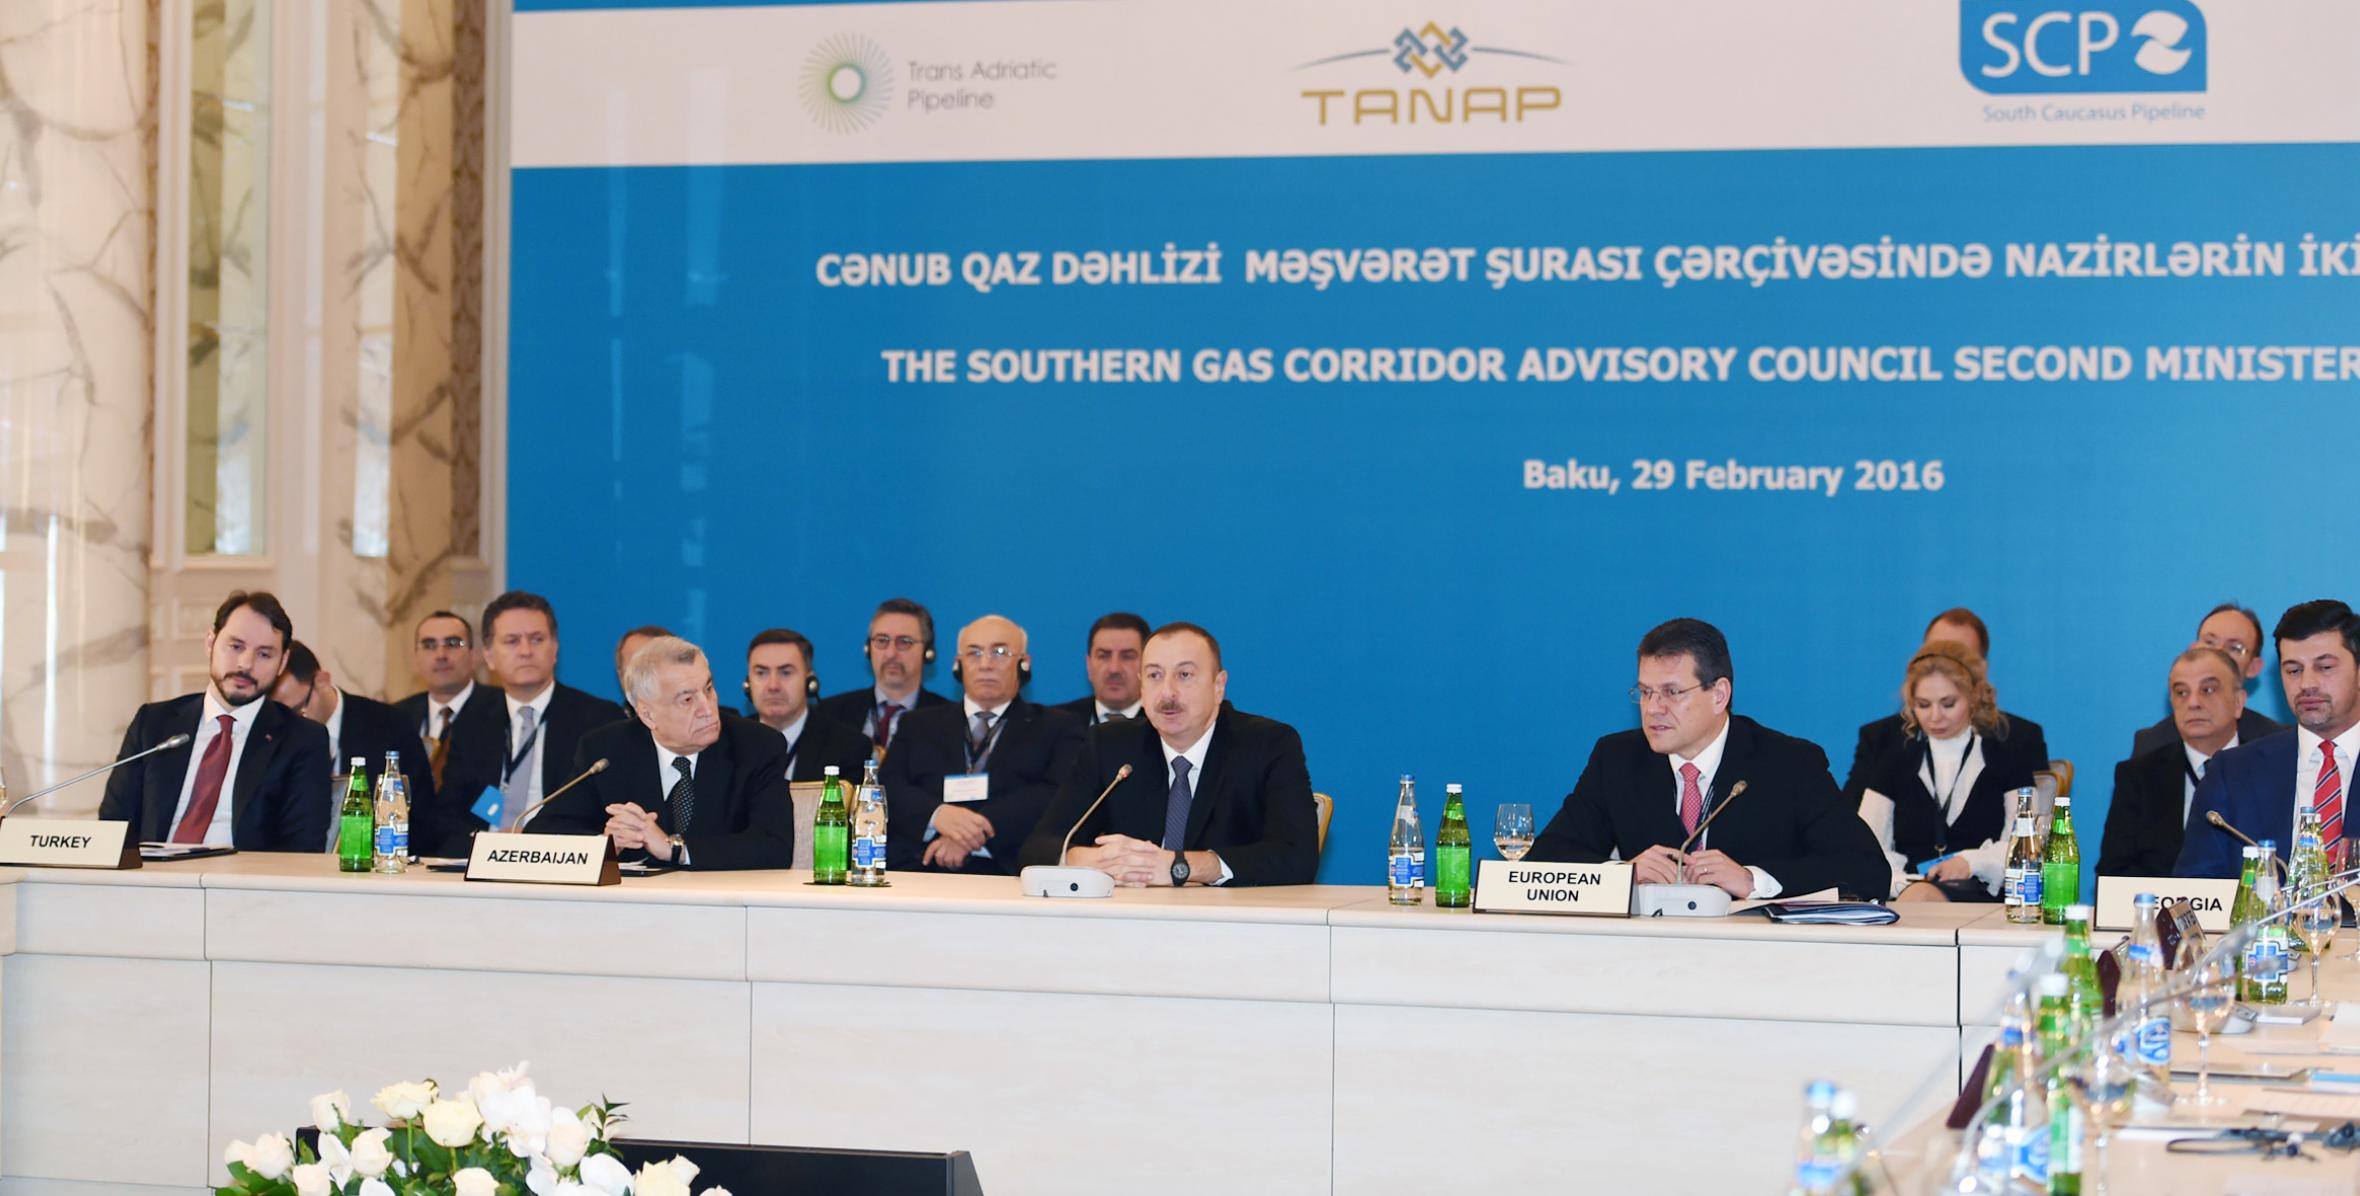 Ilham Aliyev attended at the second meeting of the Southern Gas Corridor Advisory Council